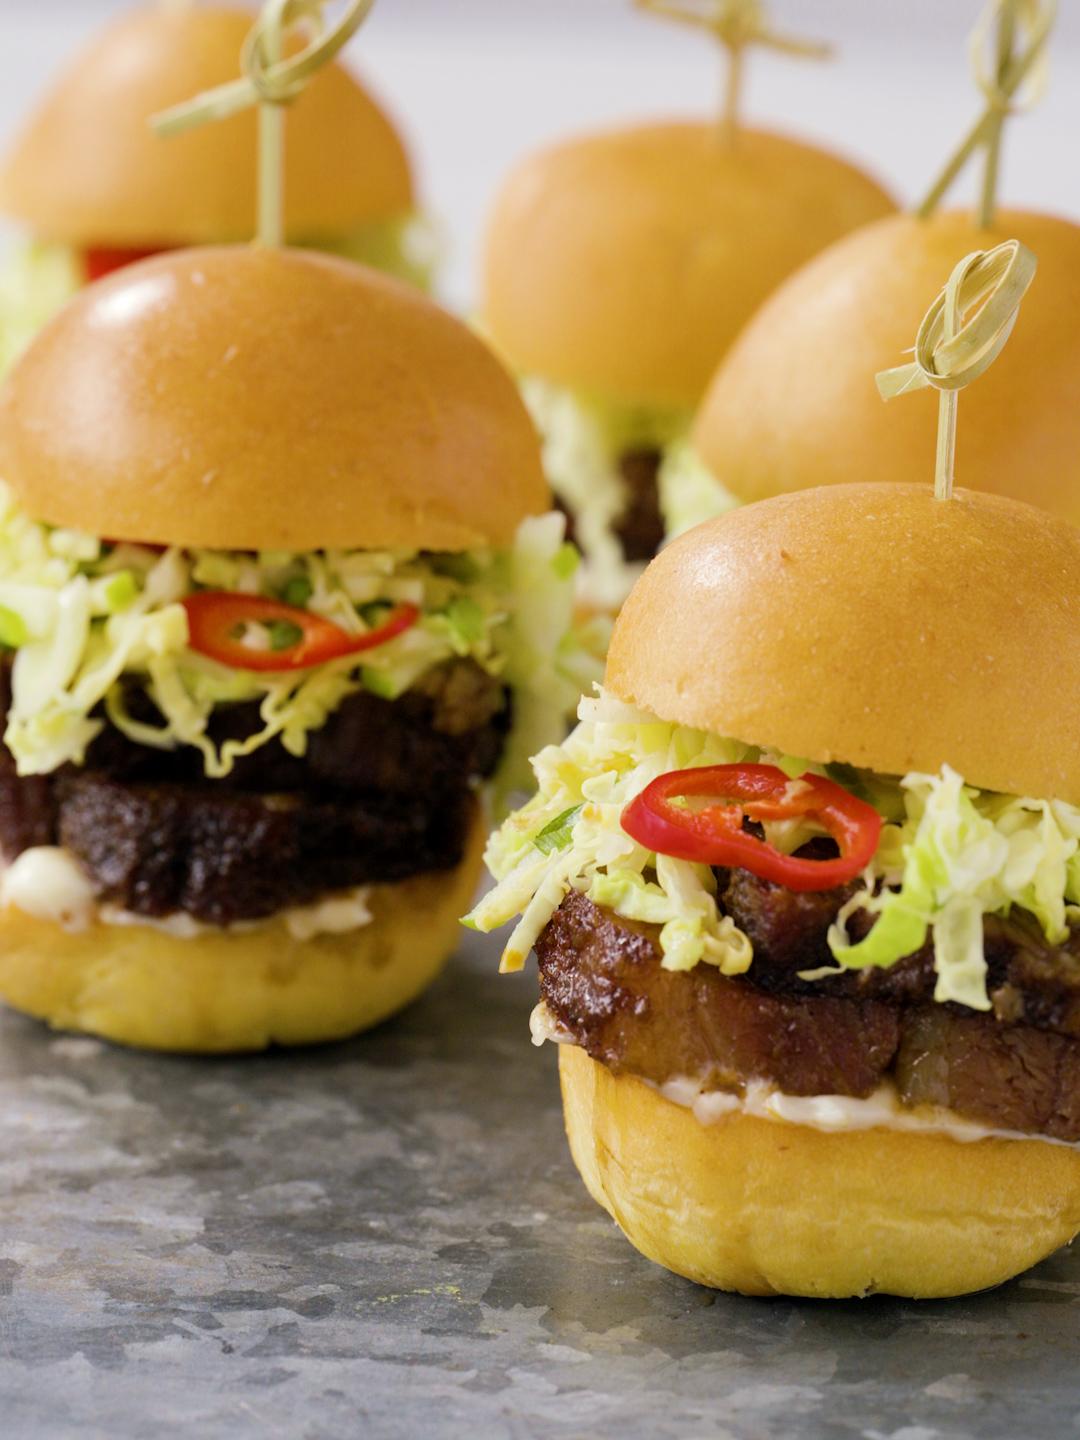 Beef Sliders with Pickled Chilies and Apple Slaw